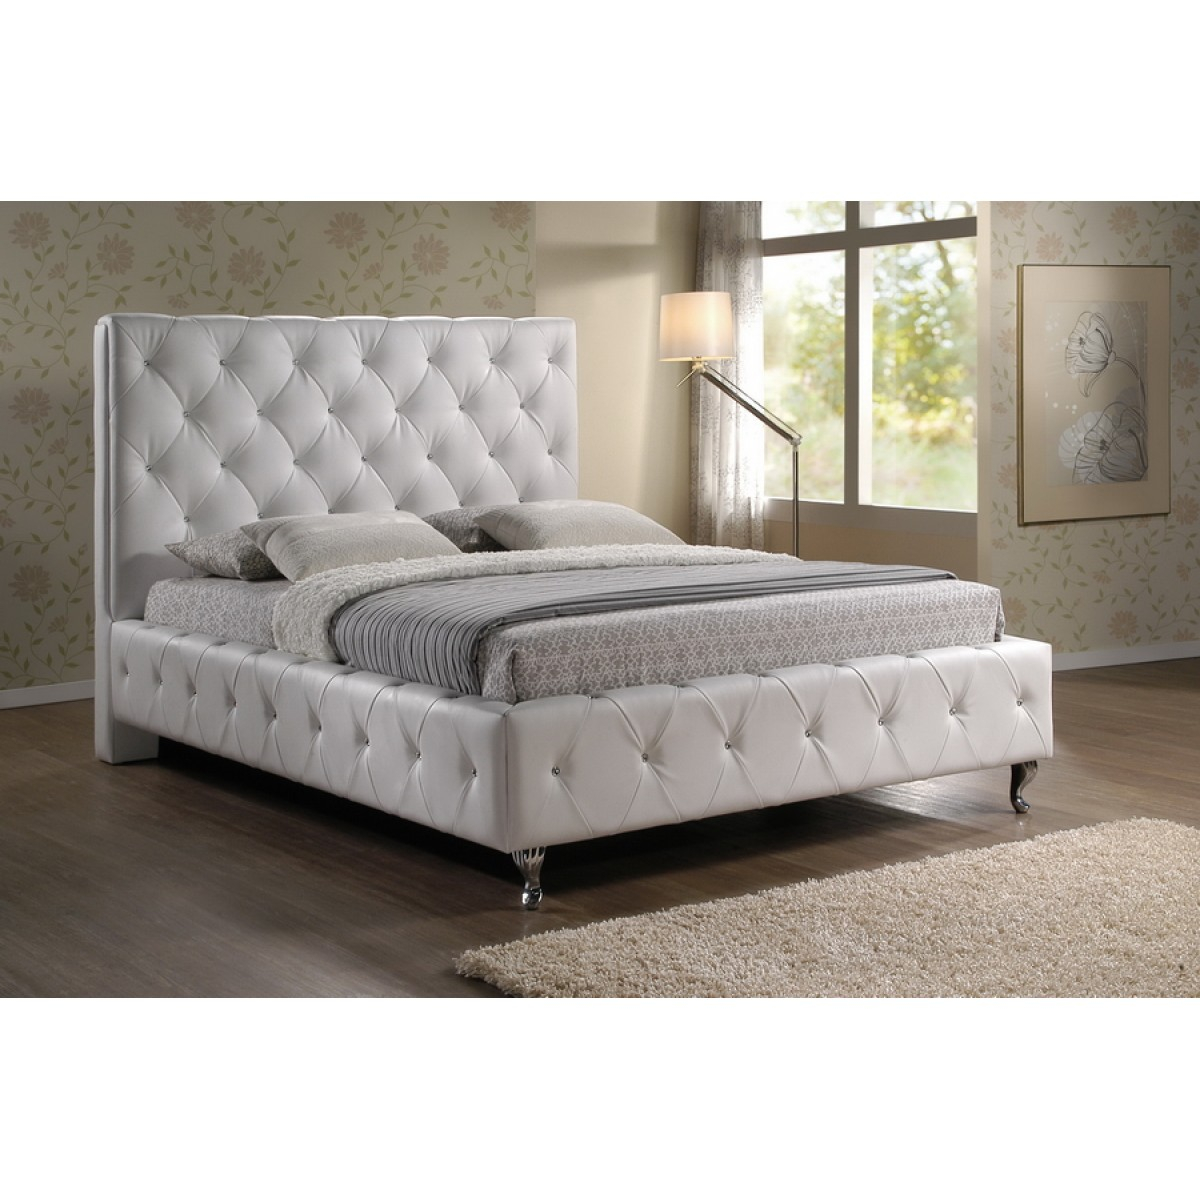 Stella Crystal Tufted White Modern Bed With Upholstered Headboard Queen Size pertaining to dimensions 1200 X 1200